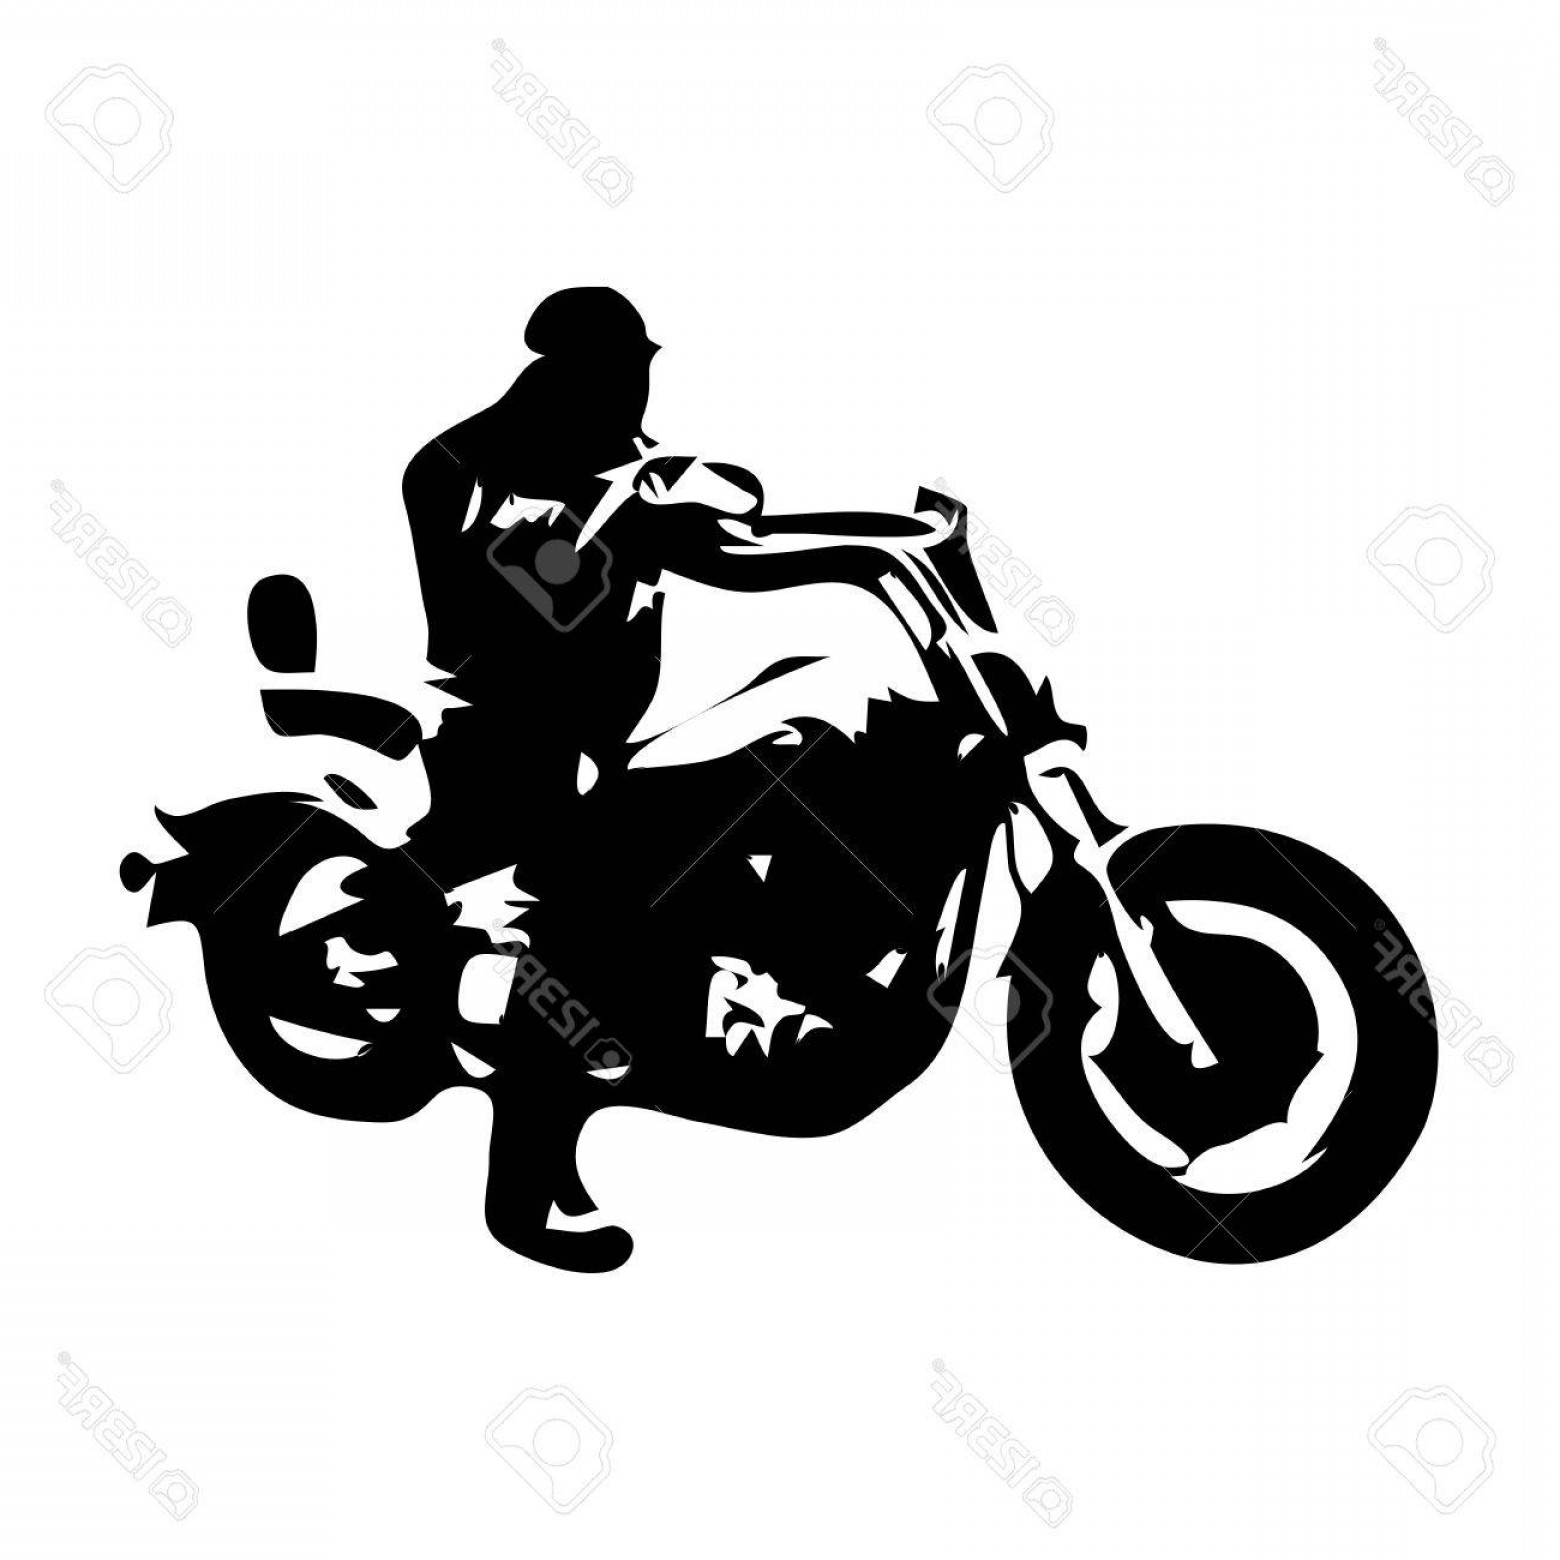 Motorcycle Rider Silhouette Vector At Collection Of